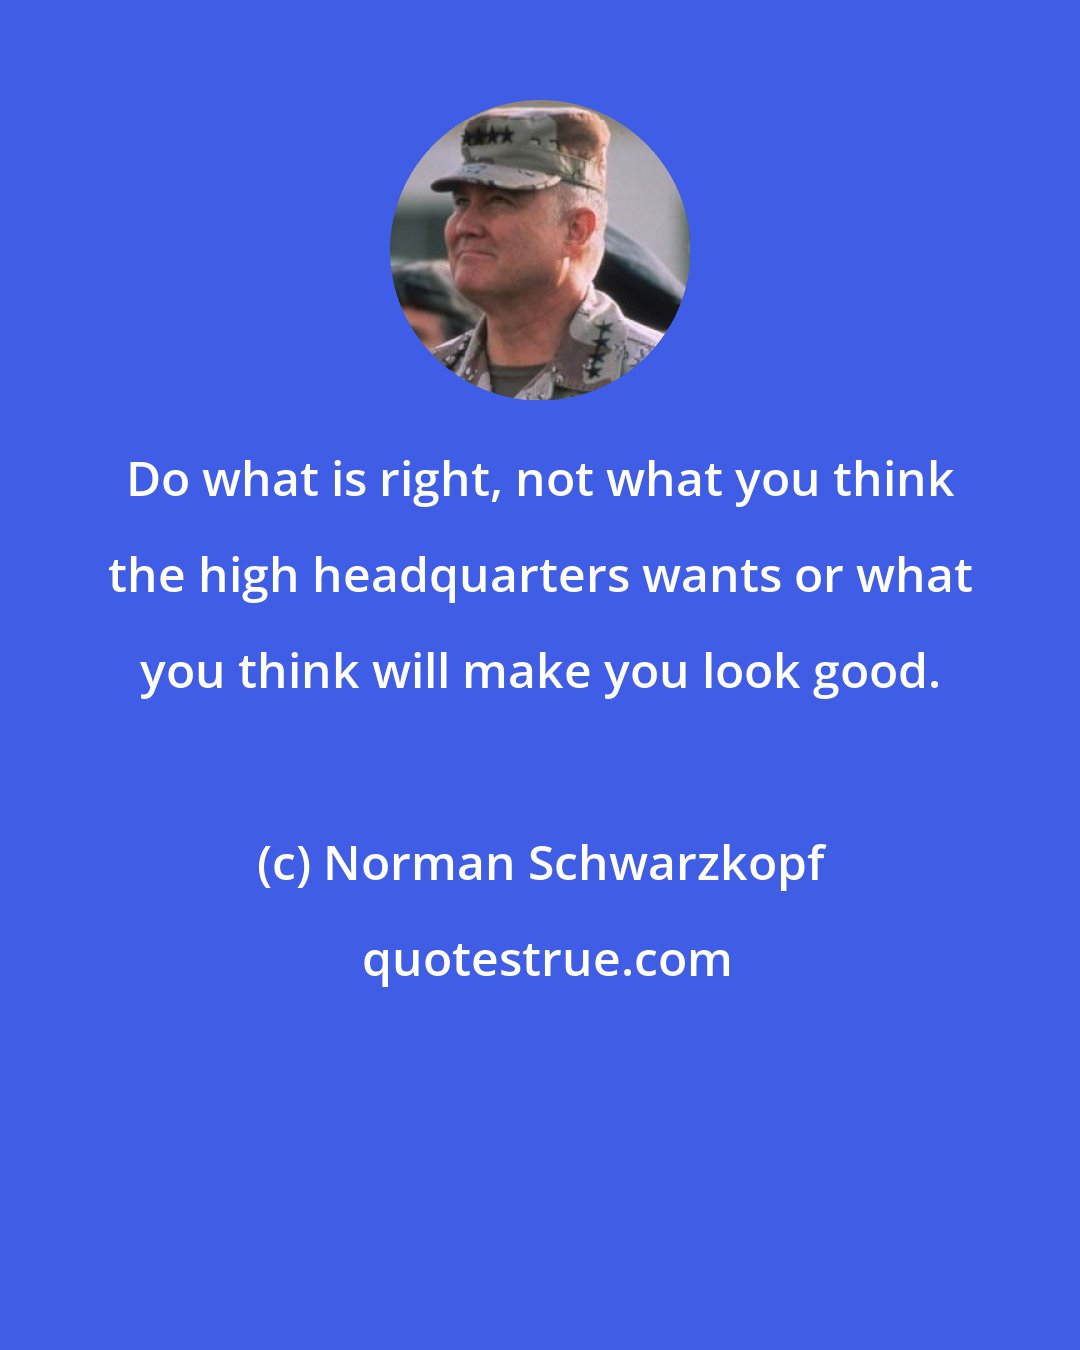 Norman Schwarzkopf: Do what is right, not what you think the high headquarters wants or what you think will make you look good.